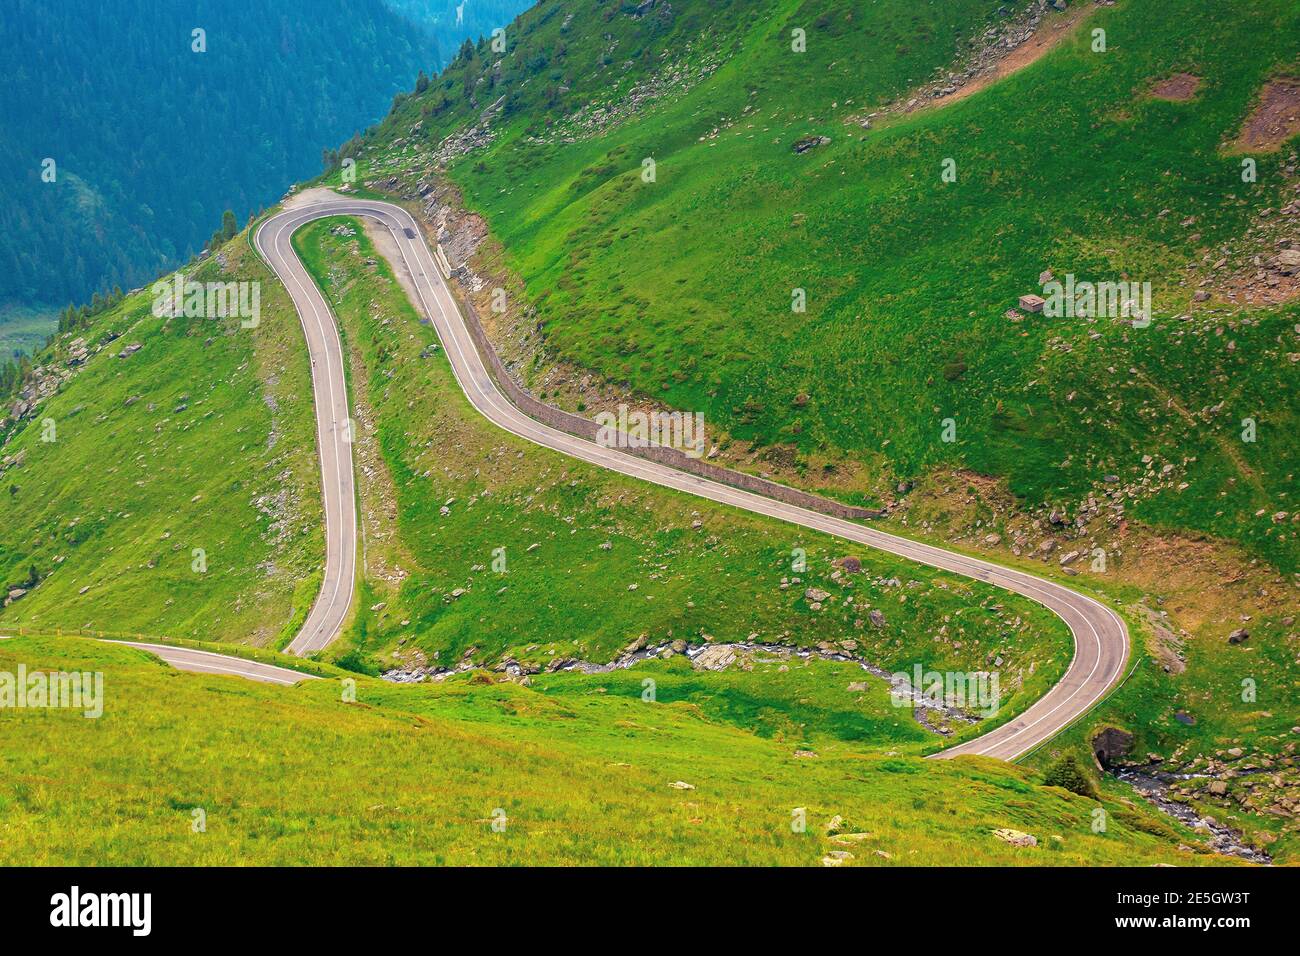 road in high mountains of romania. popular travel destination of fagaras ridge. route 7c is also known as transfagarasan. dramatyc summer weather with Stock Photo